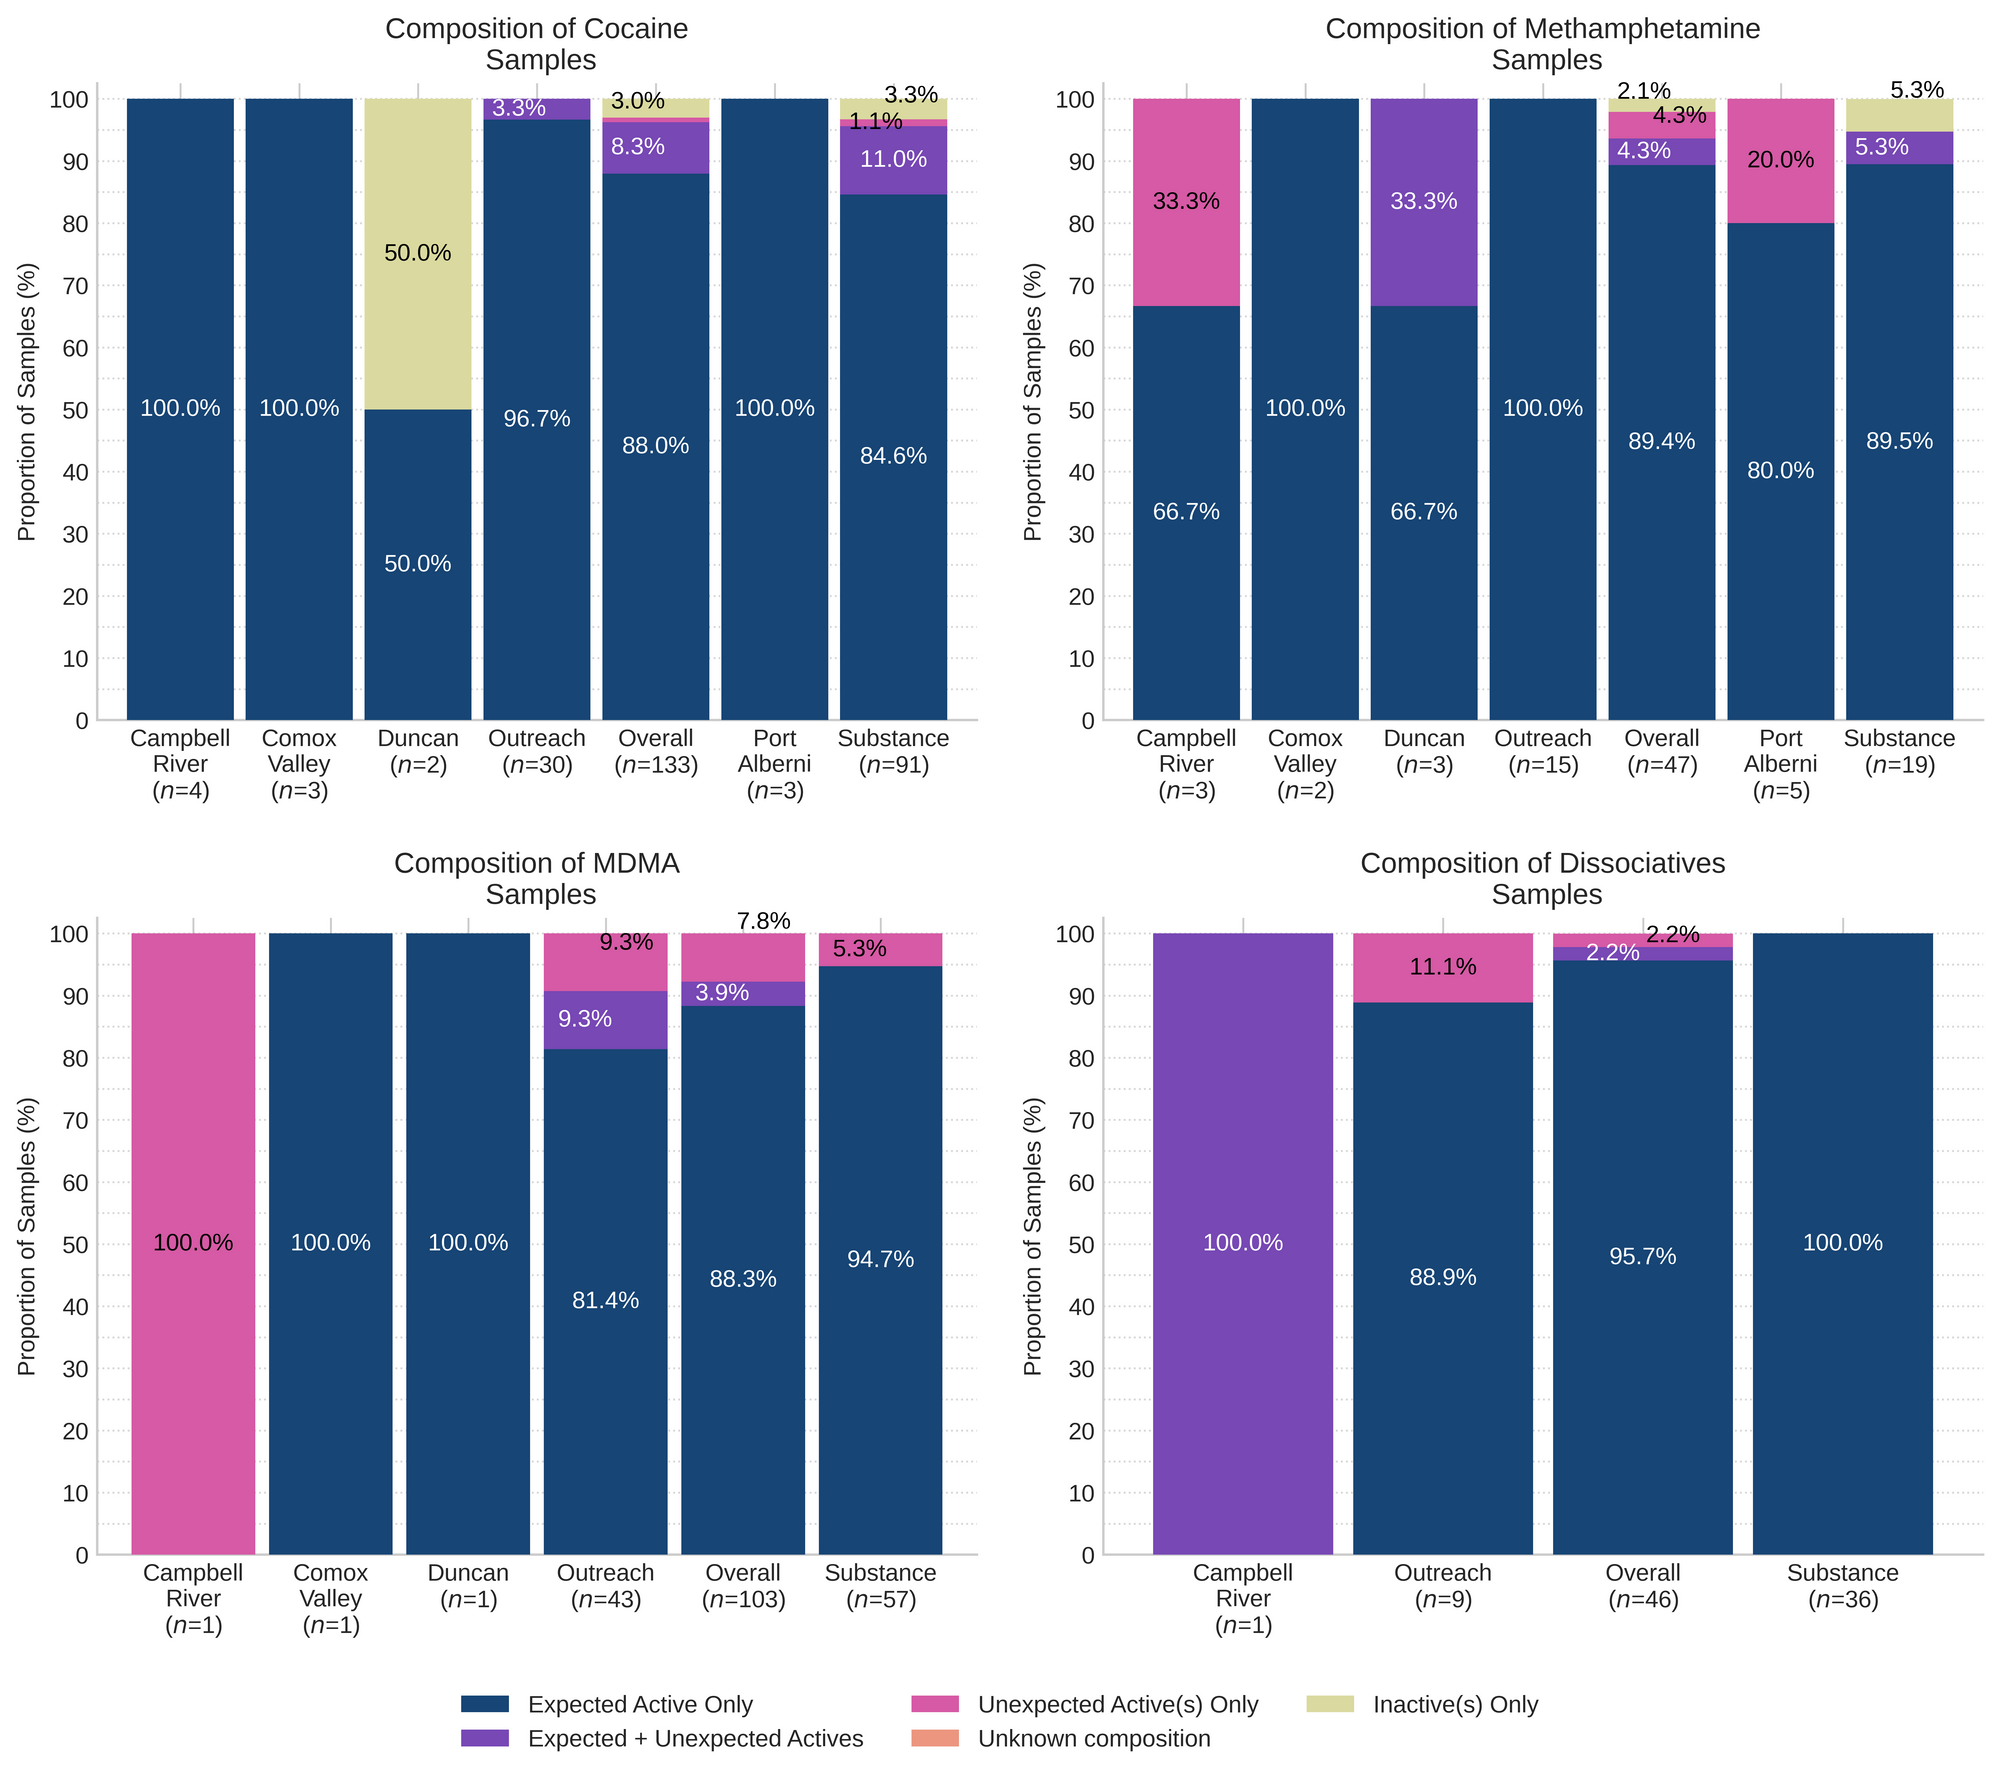 Figure 2. Compositional breakdown by drug class and sample collection location/method. Bars are stacked by the percentage of samples in each category, with the individual sample counts (and relative proportions) overlaid. “Dark Blue” groups samples that were as expected with no other notable compounds detected, “Purple” groups samples that contained the expected drug and contained other unexpected active(s), “Magenta” groups samples that did not contain the expected active but did contain unexpected active(s), Salmon groups samples where we were unable to determine the composition (e.g. scenarios where we do not have appropriate reference spectra), and Lime displays samples where no active compounds were detected.